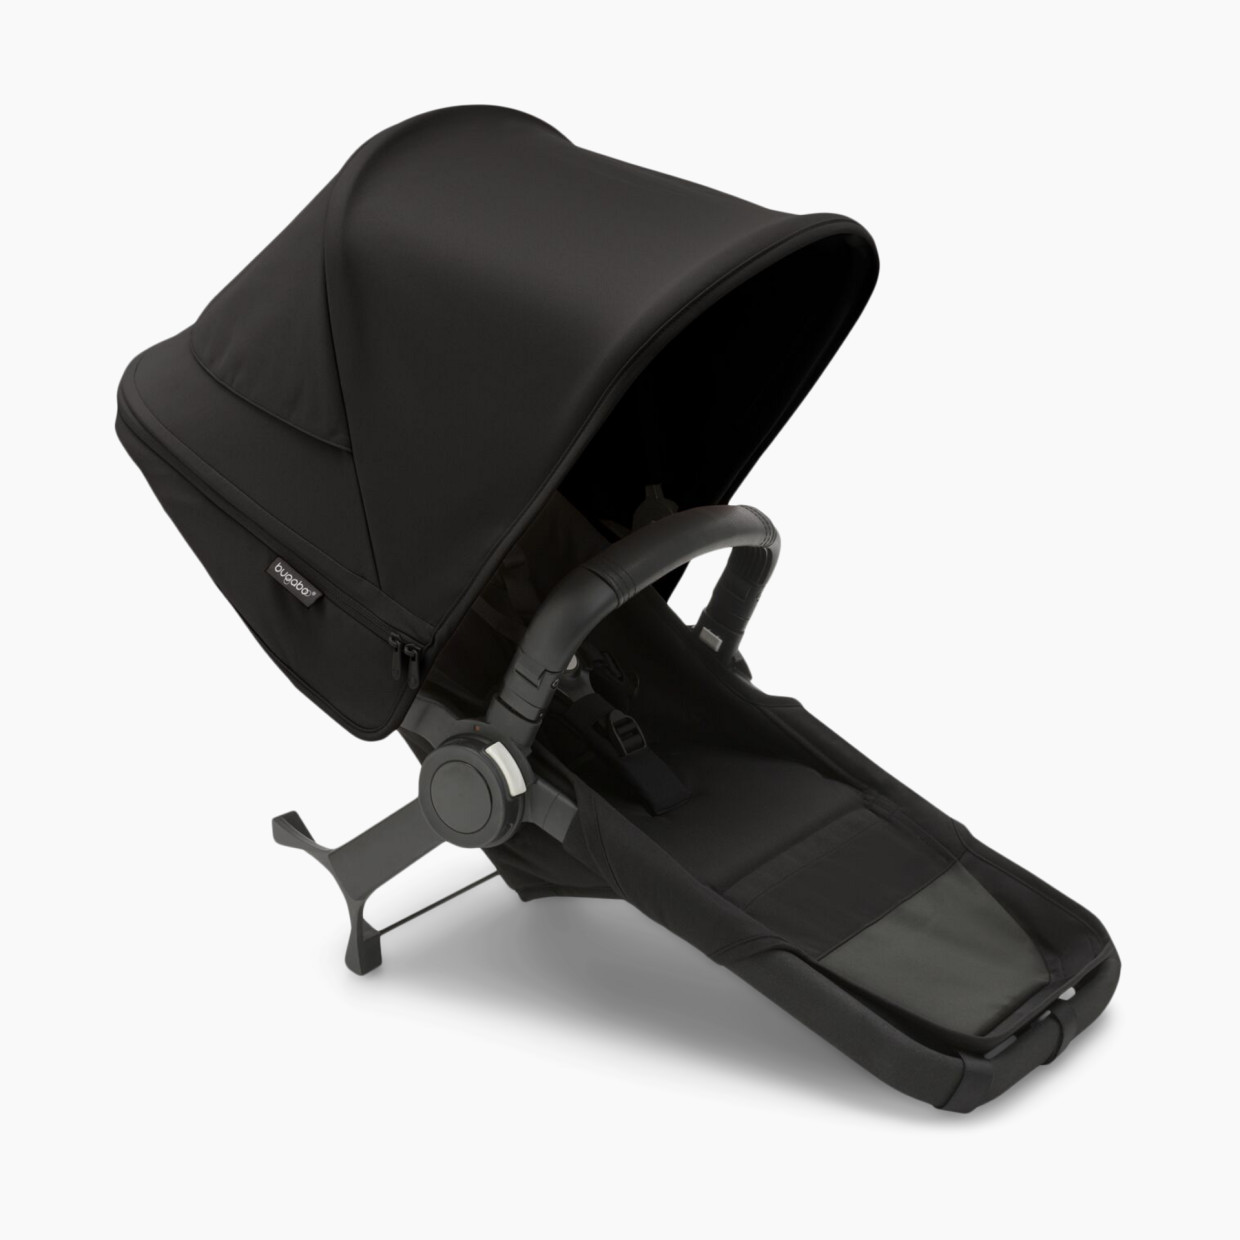 Bugaboo Donkey5 Duo Extension Set Complete - Black/Black/Core Collection.